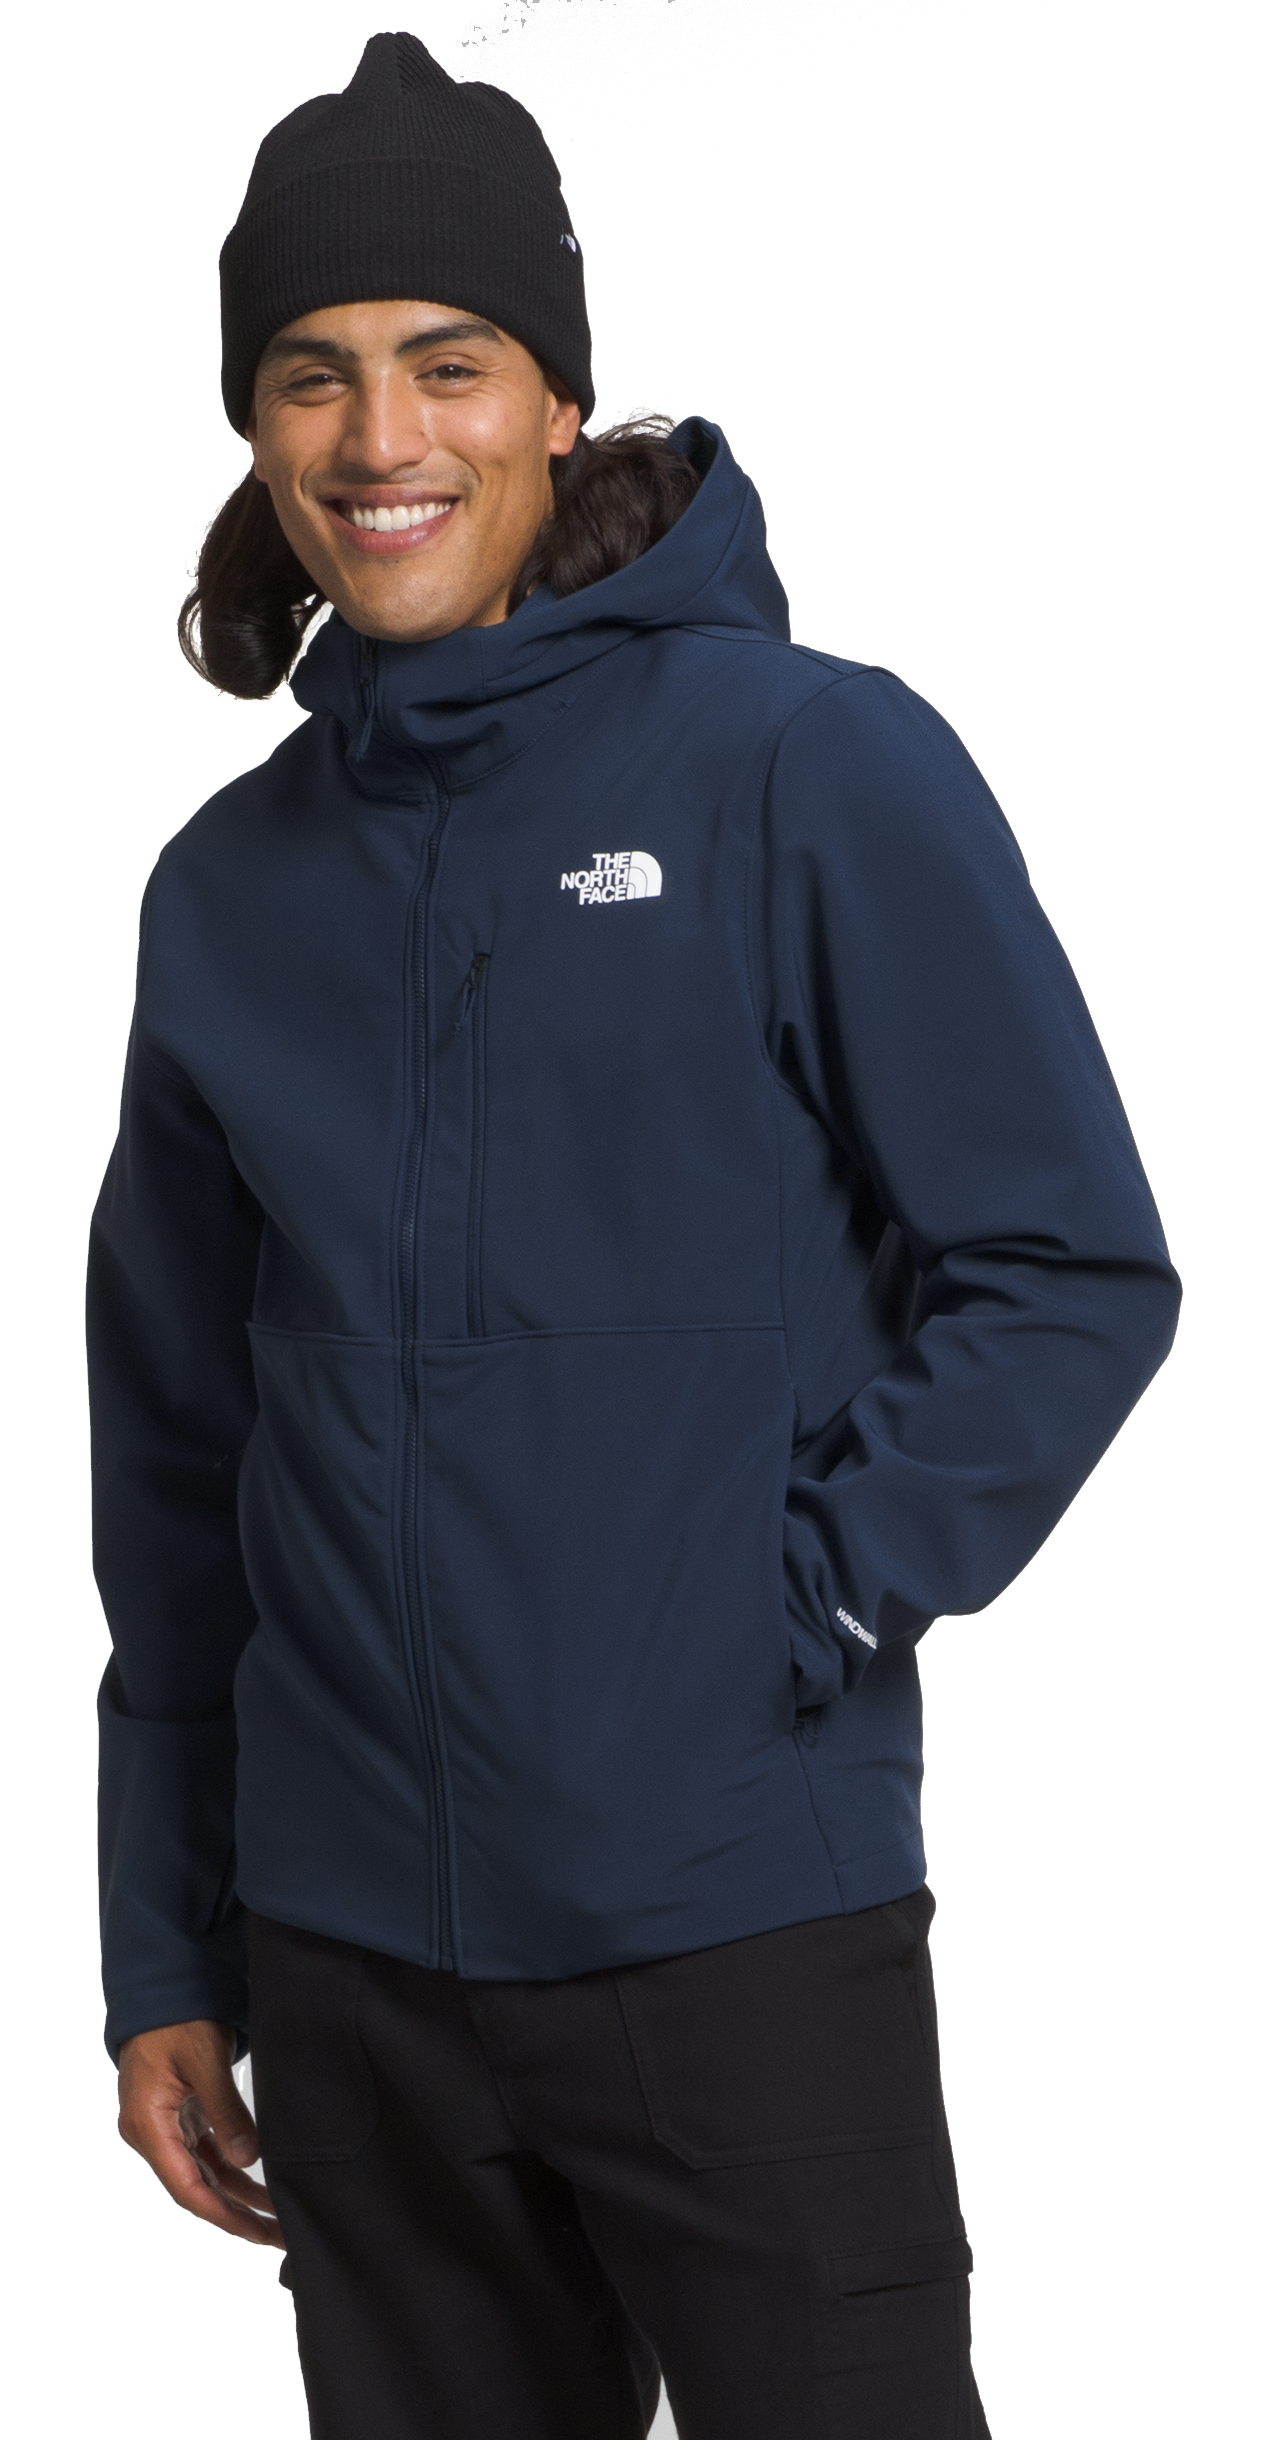 The North Face Apex Bionic 3 Hooded Jacket for Men - Summit Navy - S